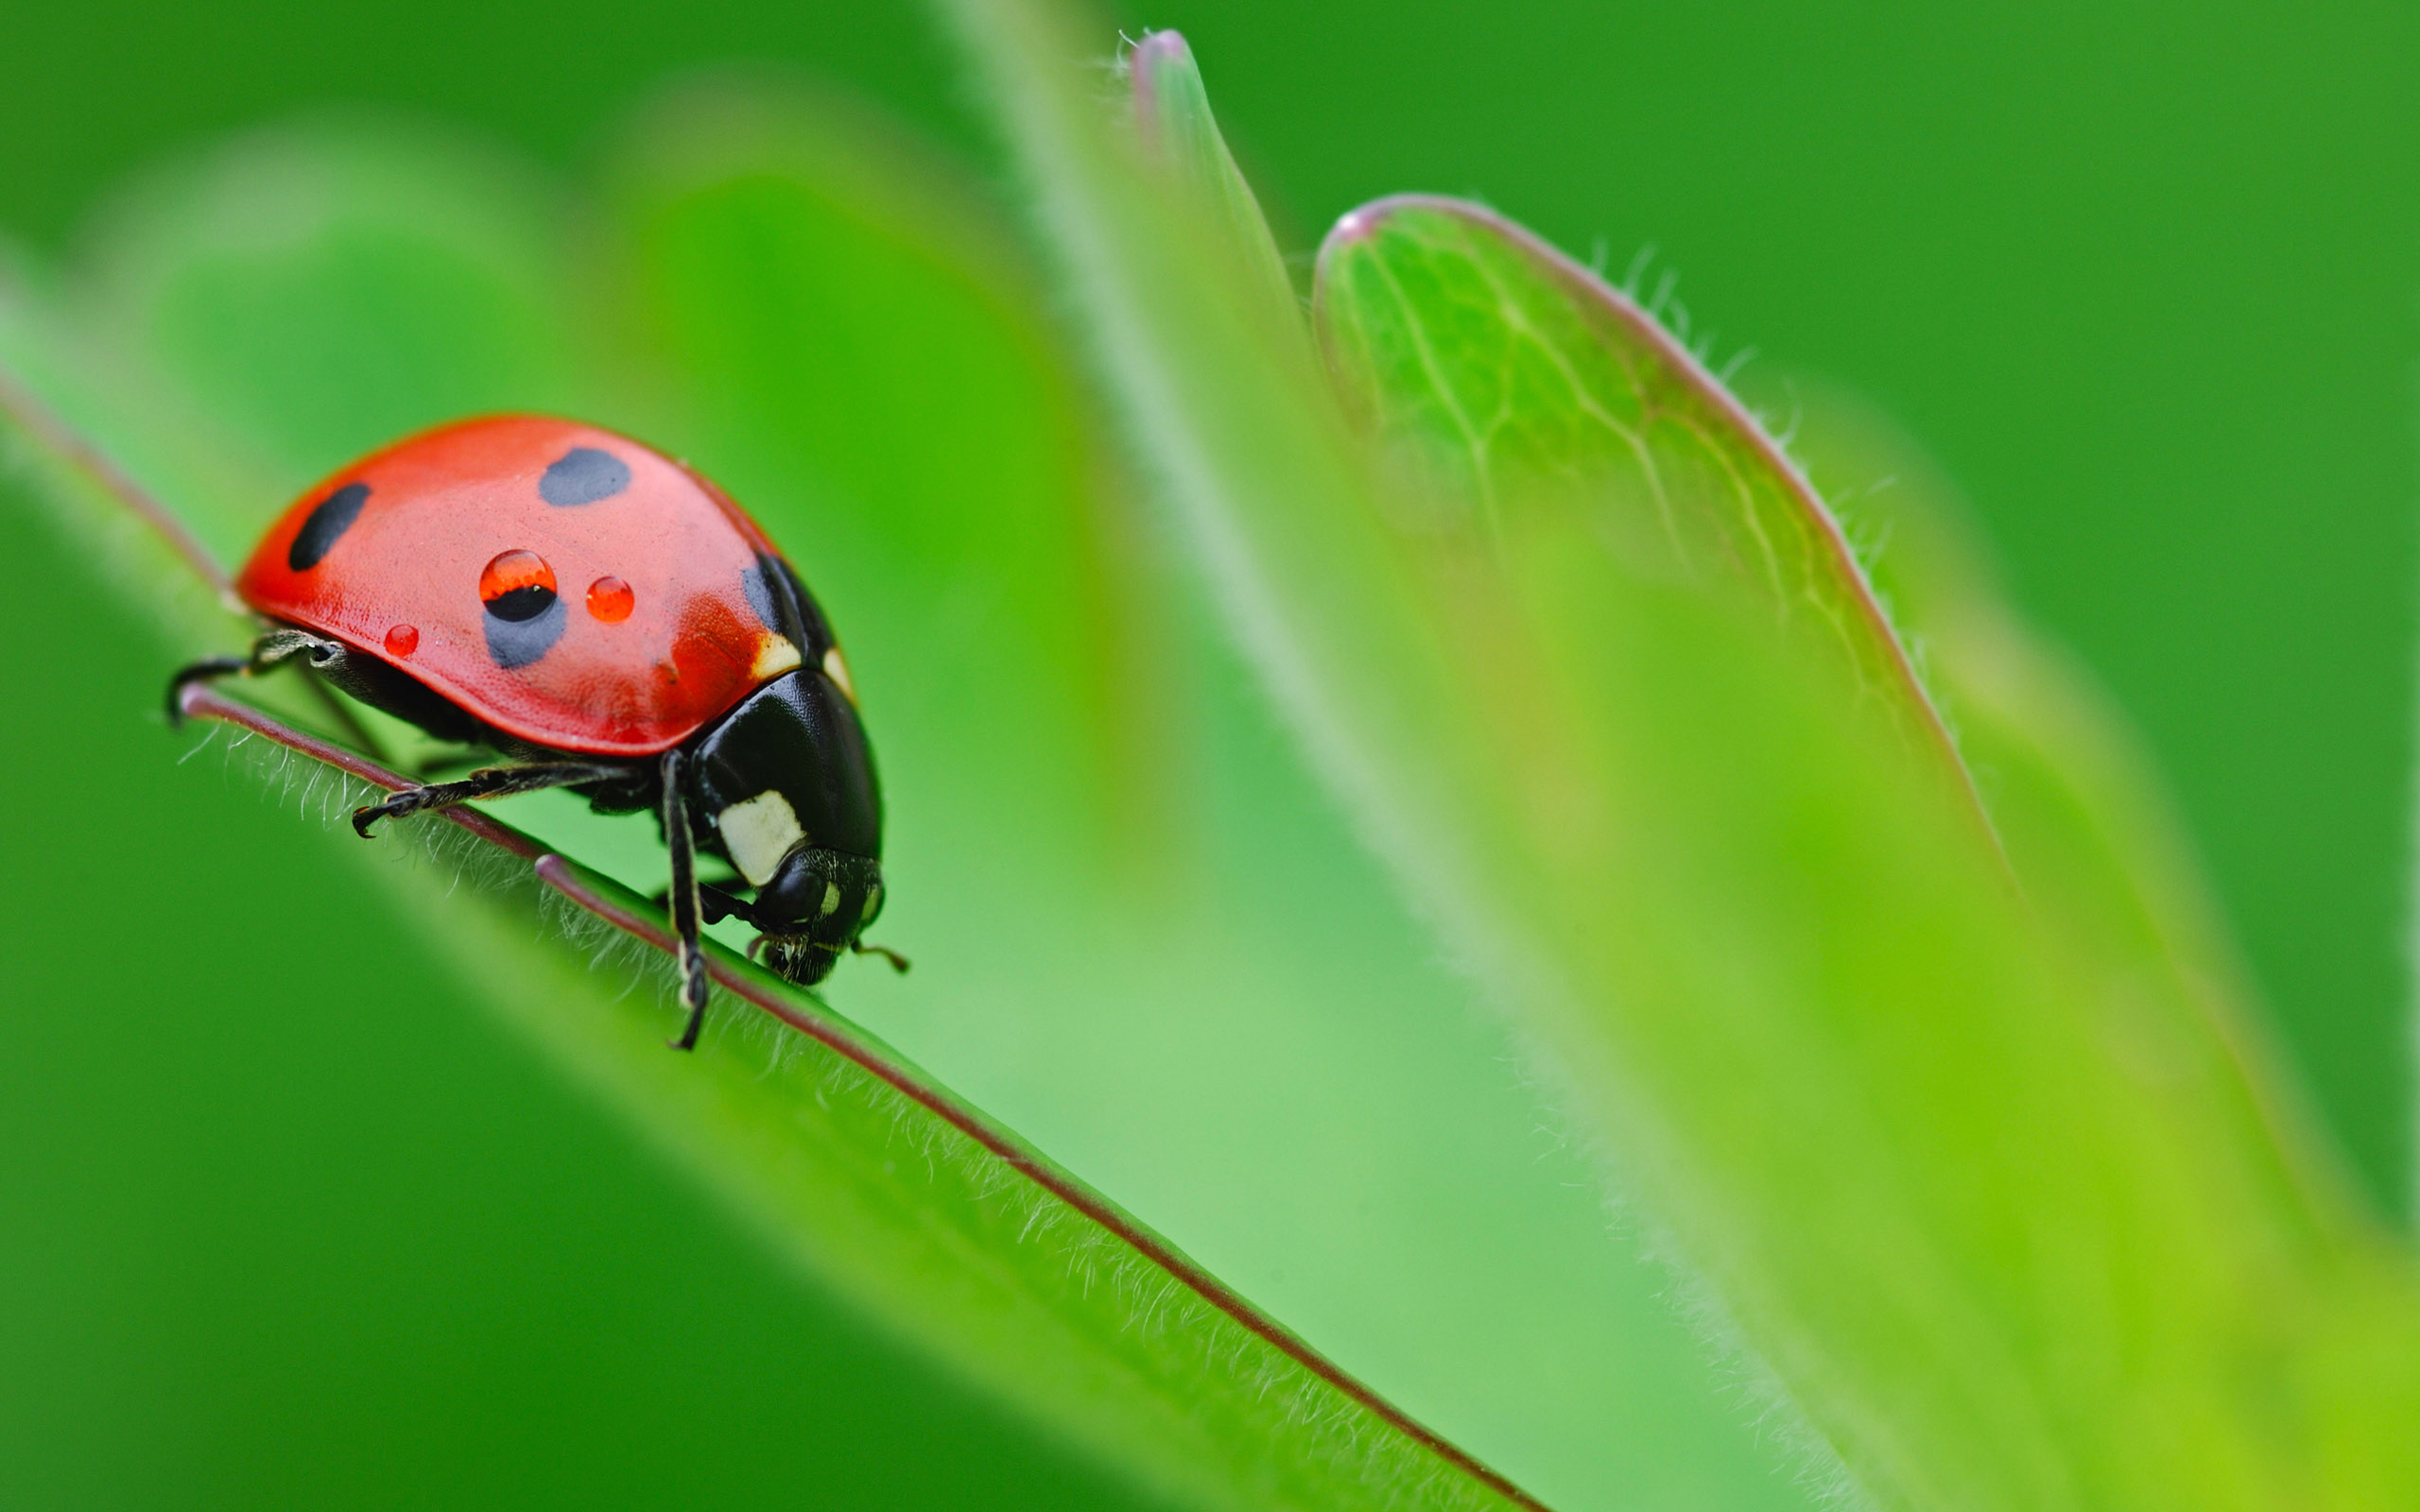 Ladybug Insect Wallpaper In The Dark On Flower